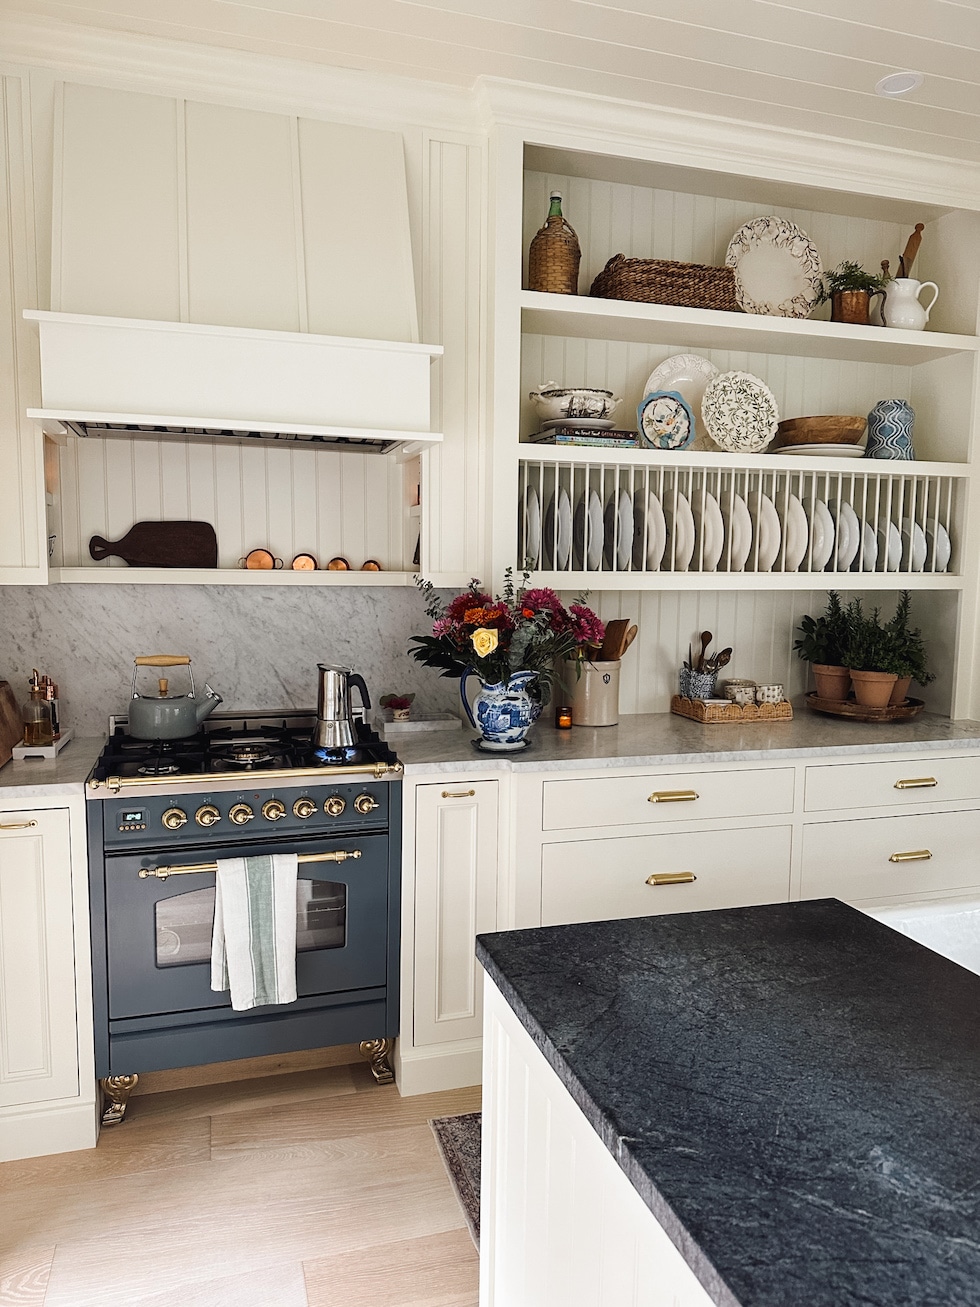 Our Kitchen Before and After (with photos of the kitchen and dining room swap!)